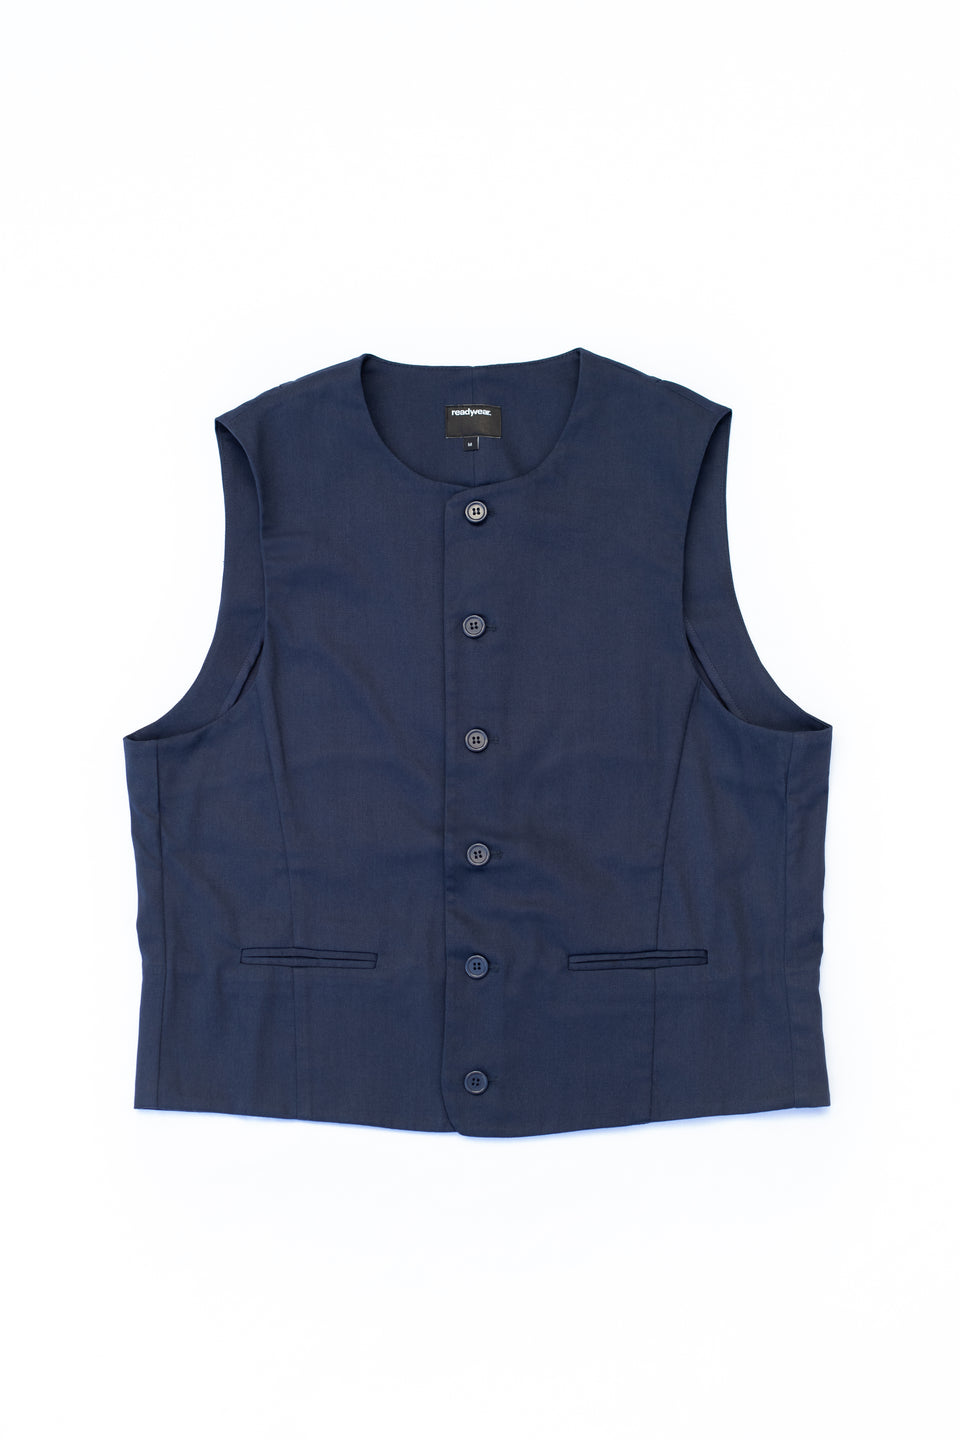 LOT 11: Male Button Up Waistcoat in Navy